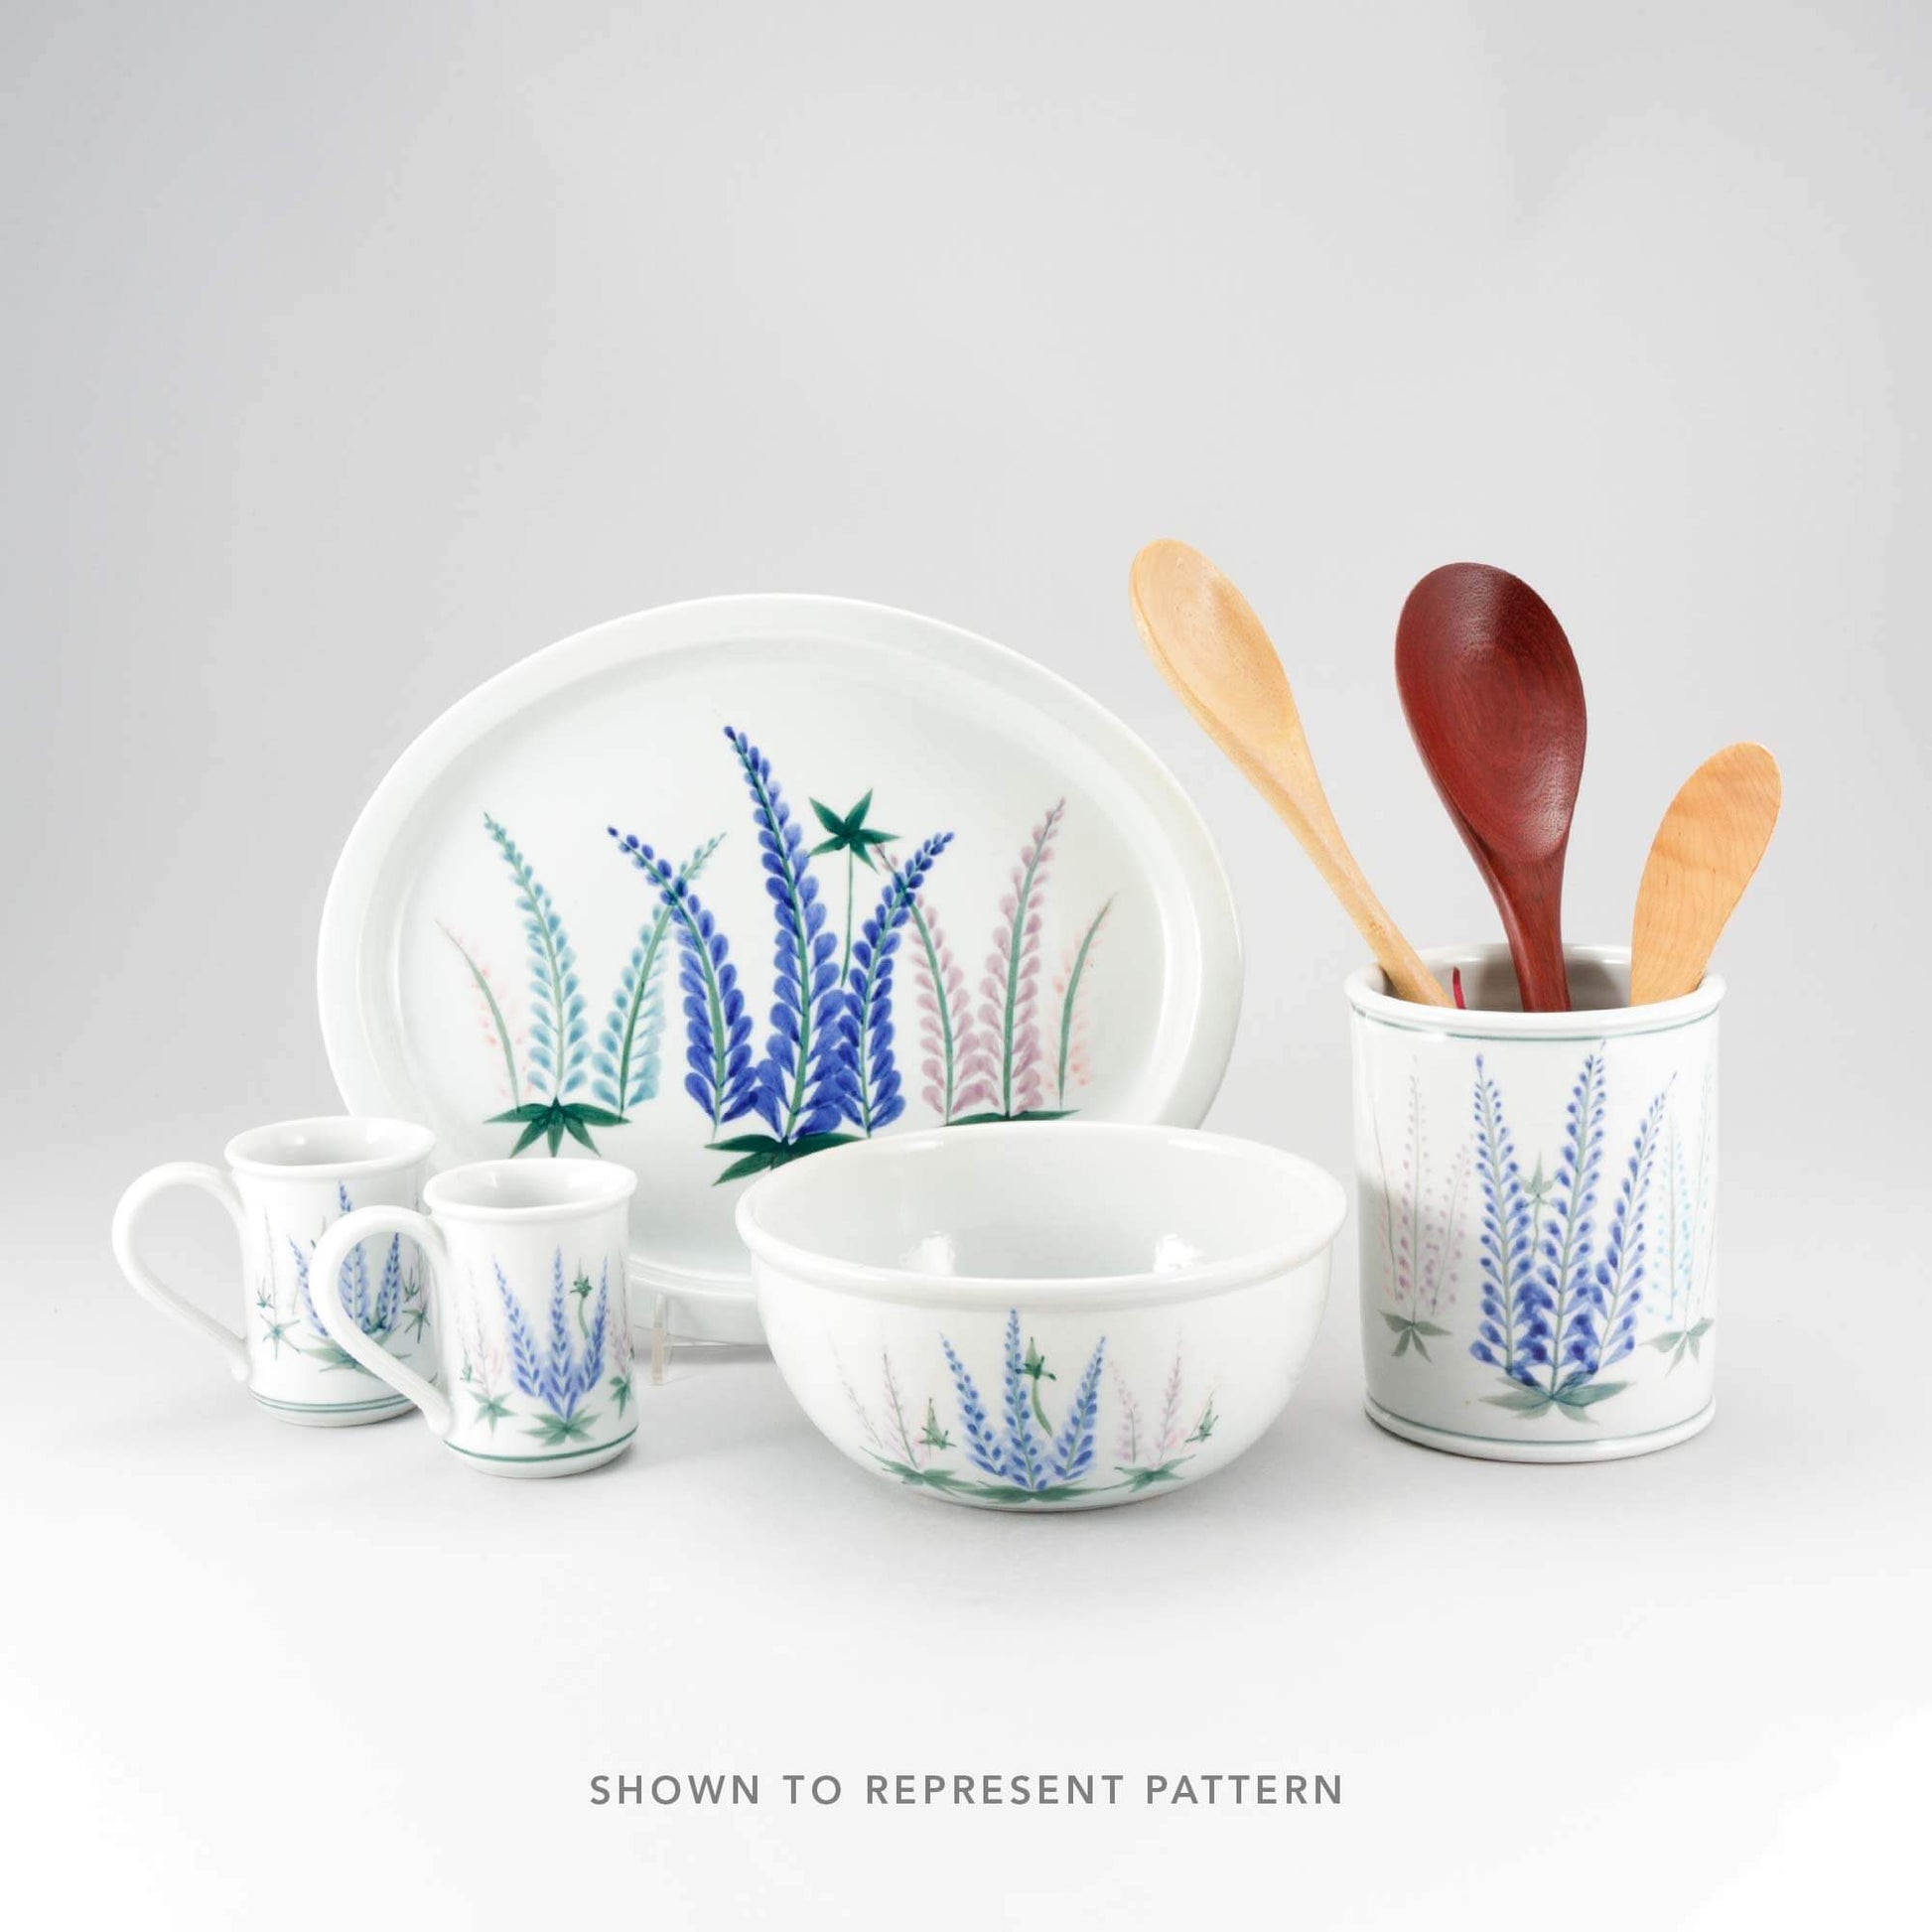 Handmade Pottery xx in Lupine pattern made by Georgetown Pottery in Maine